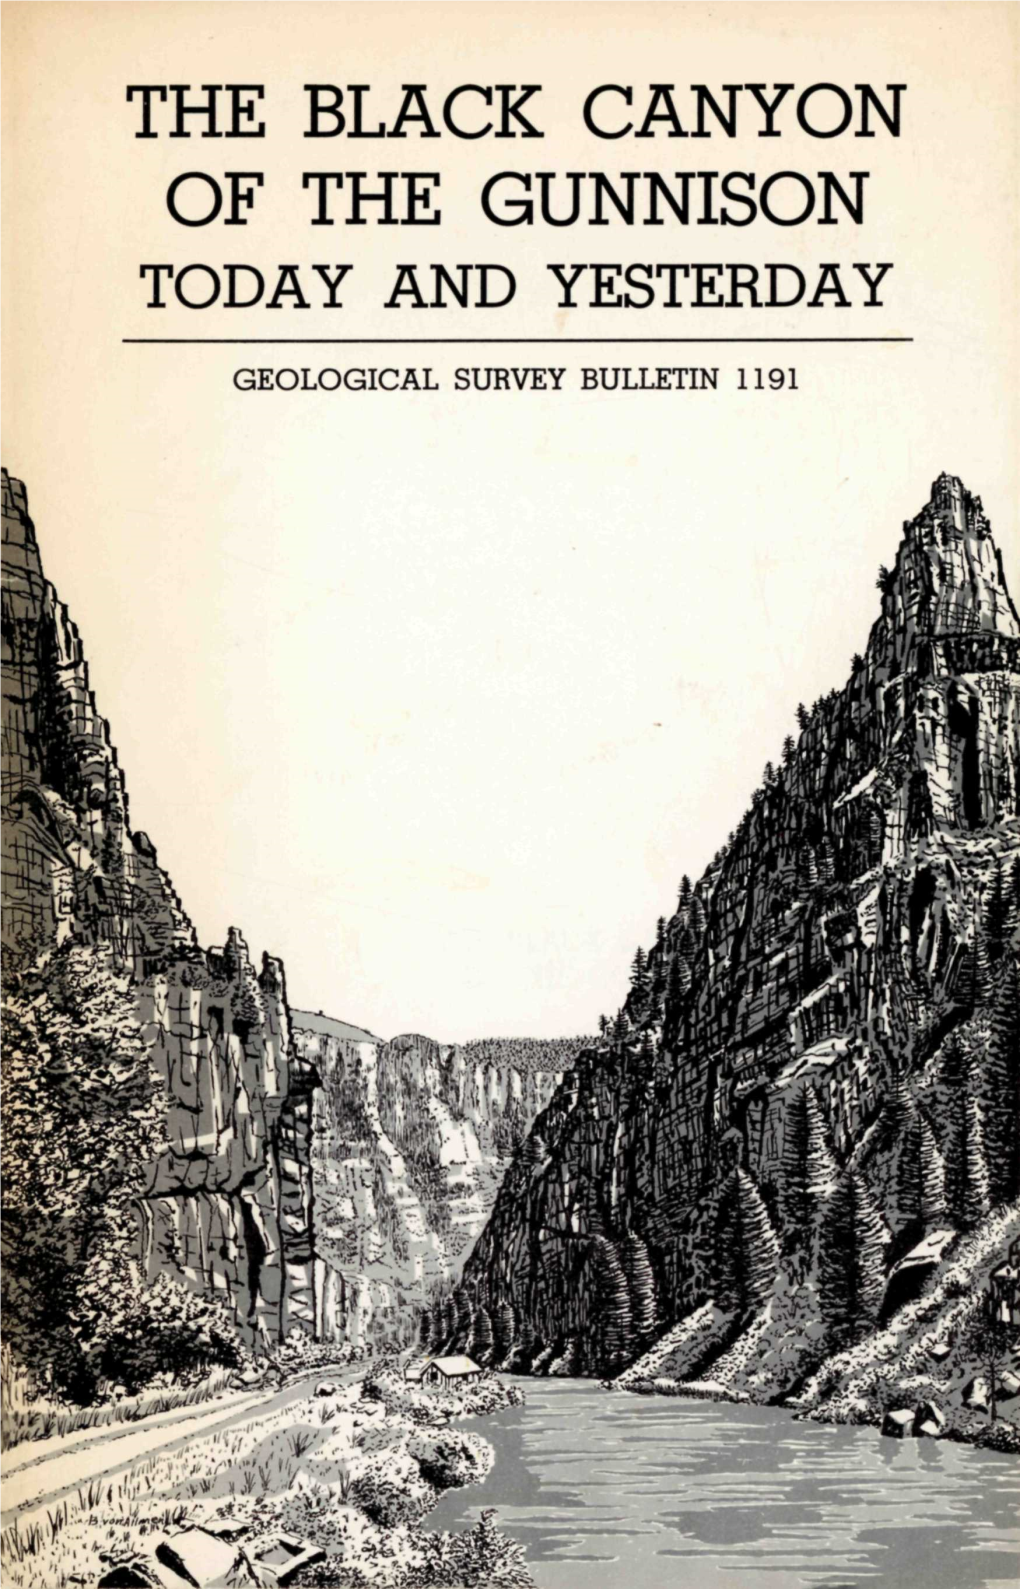 Black Canyon of the Gunnison: Today and Yesterday